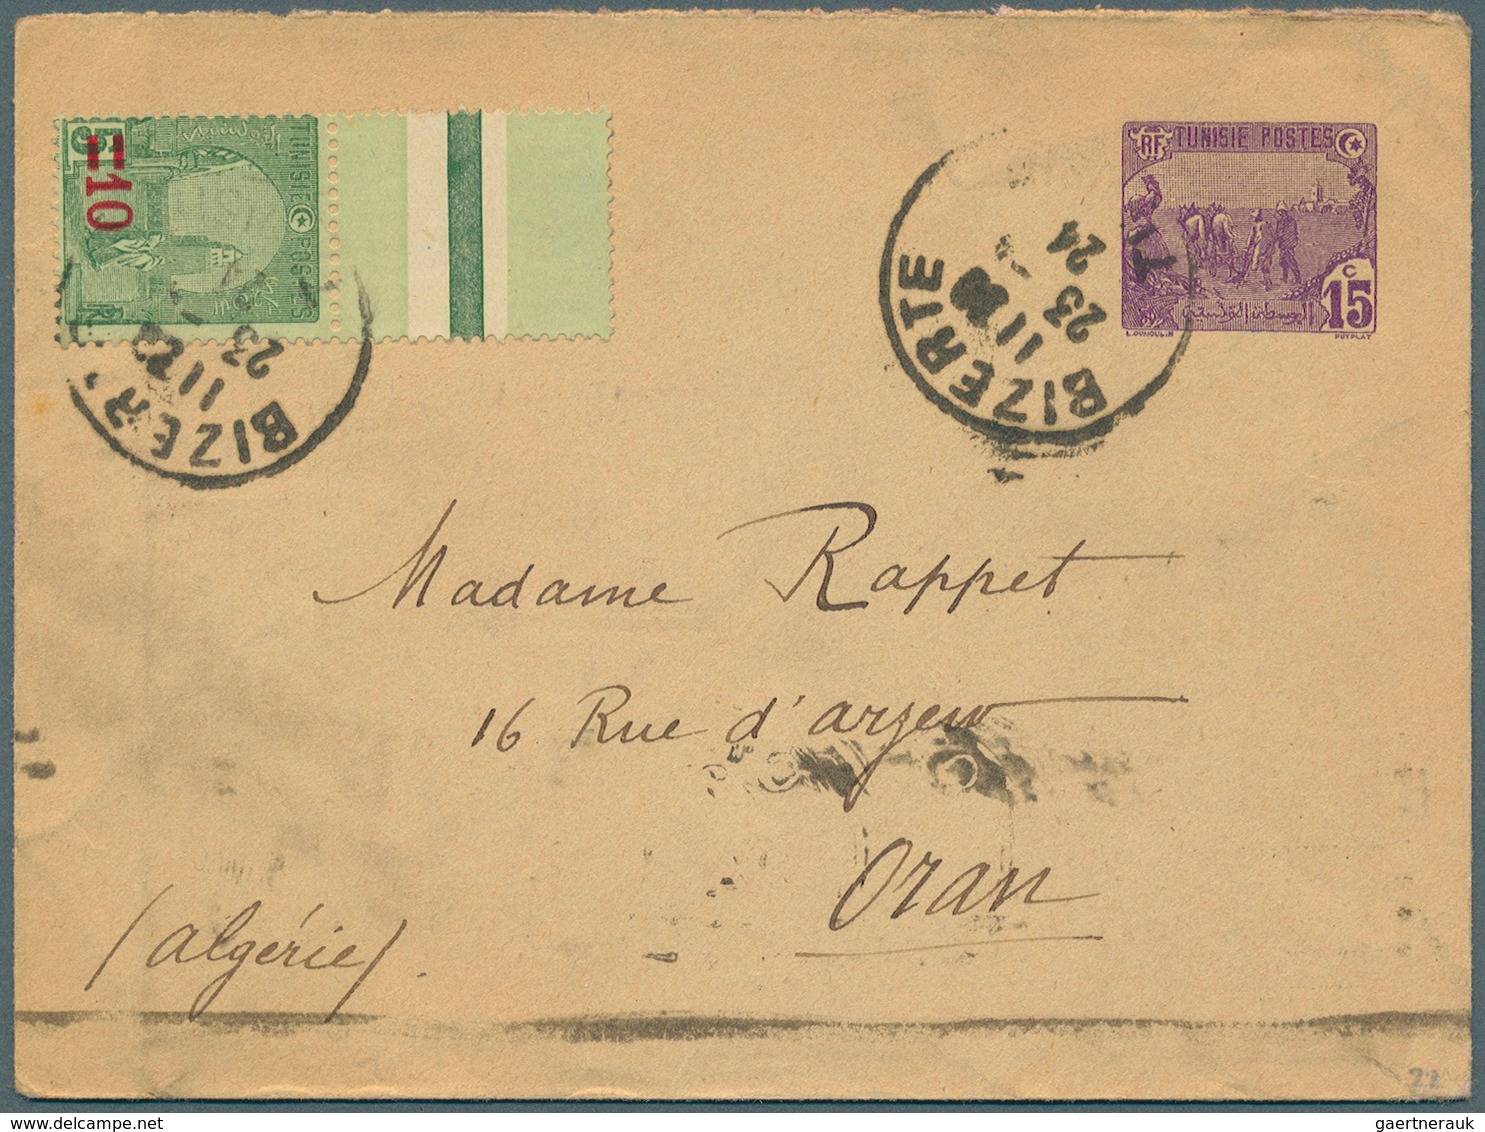 Tunesien: 1854 - 1965, over 230 covers, PPC and postal stationery's including two franked covers of